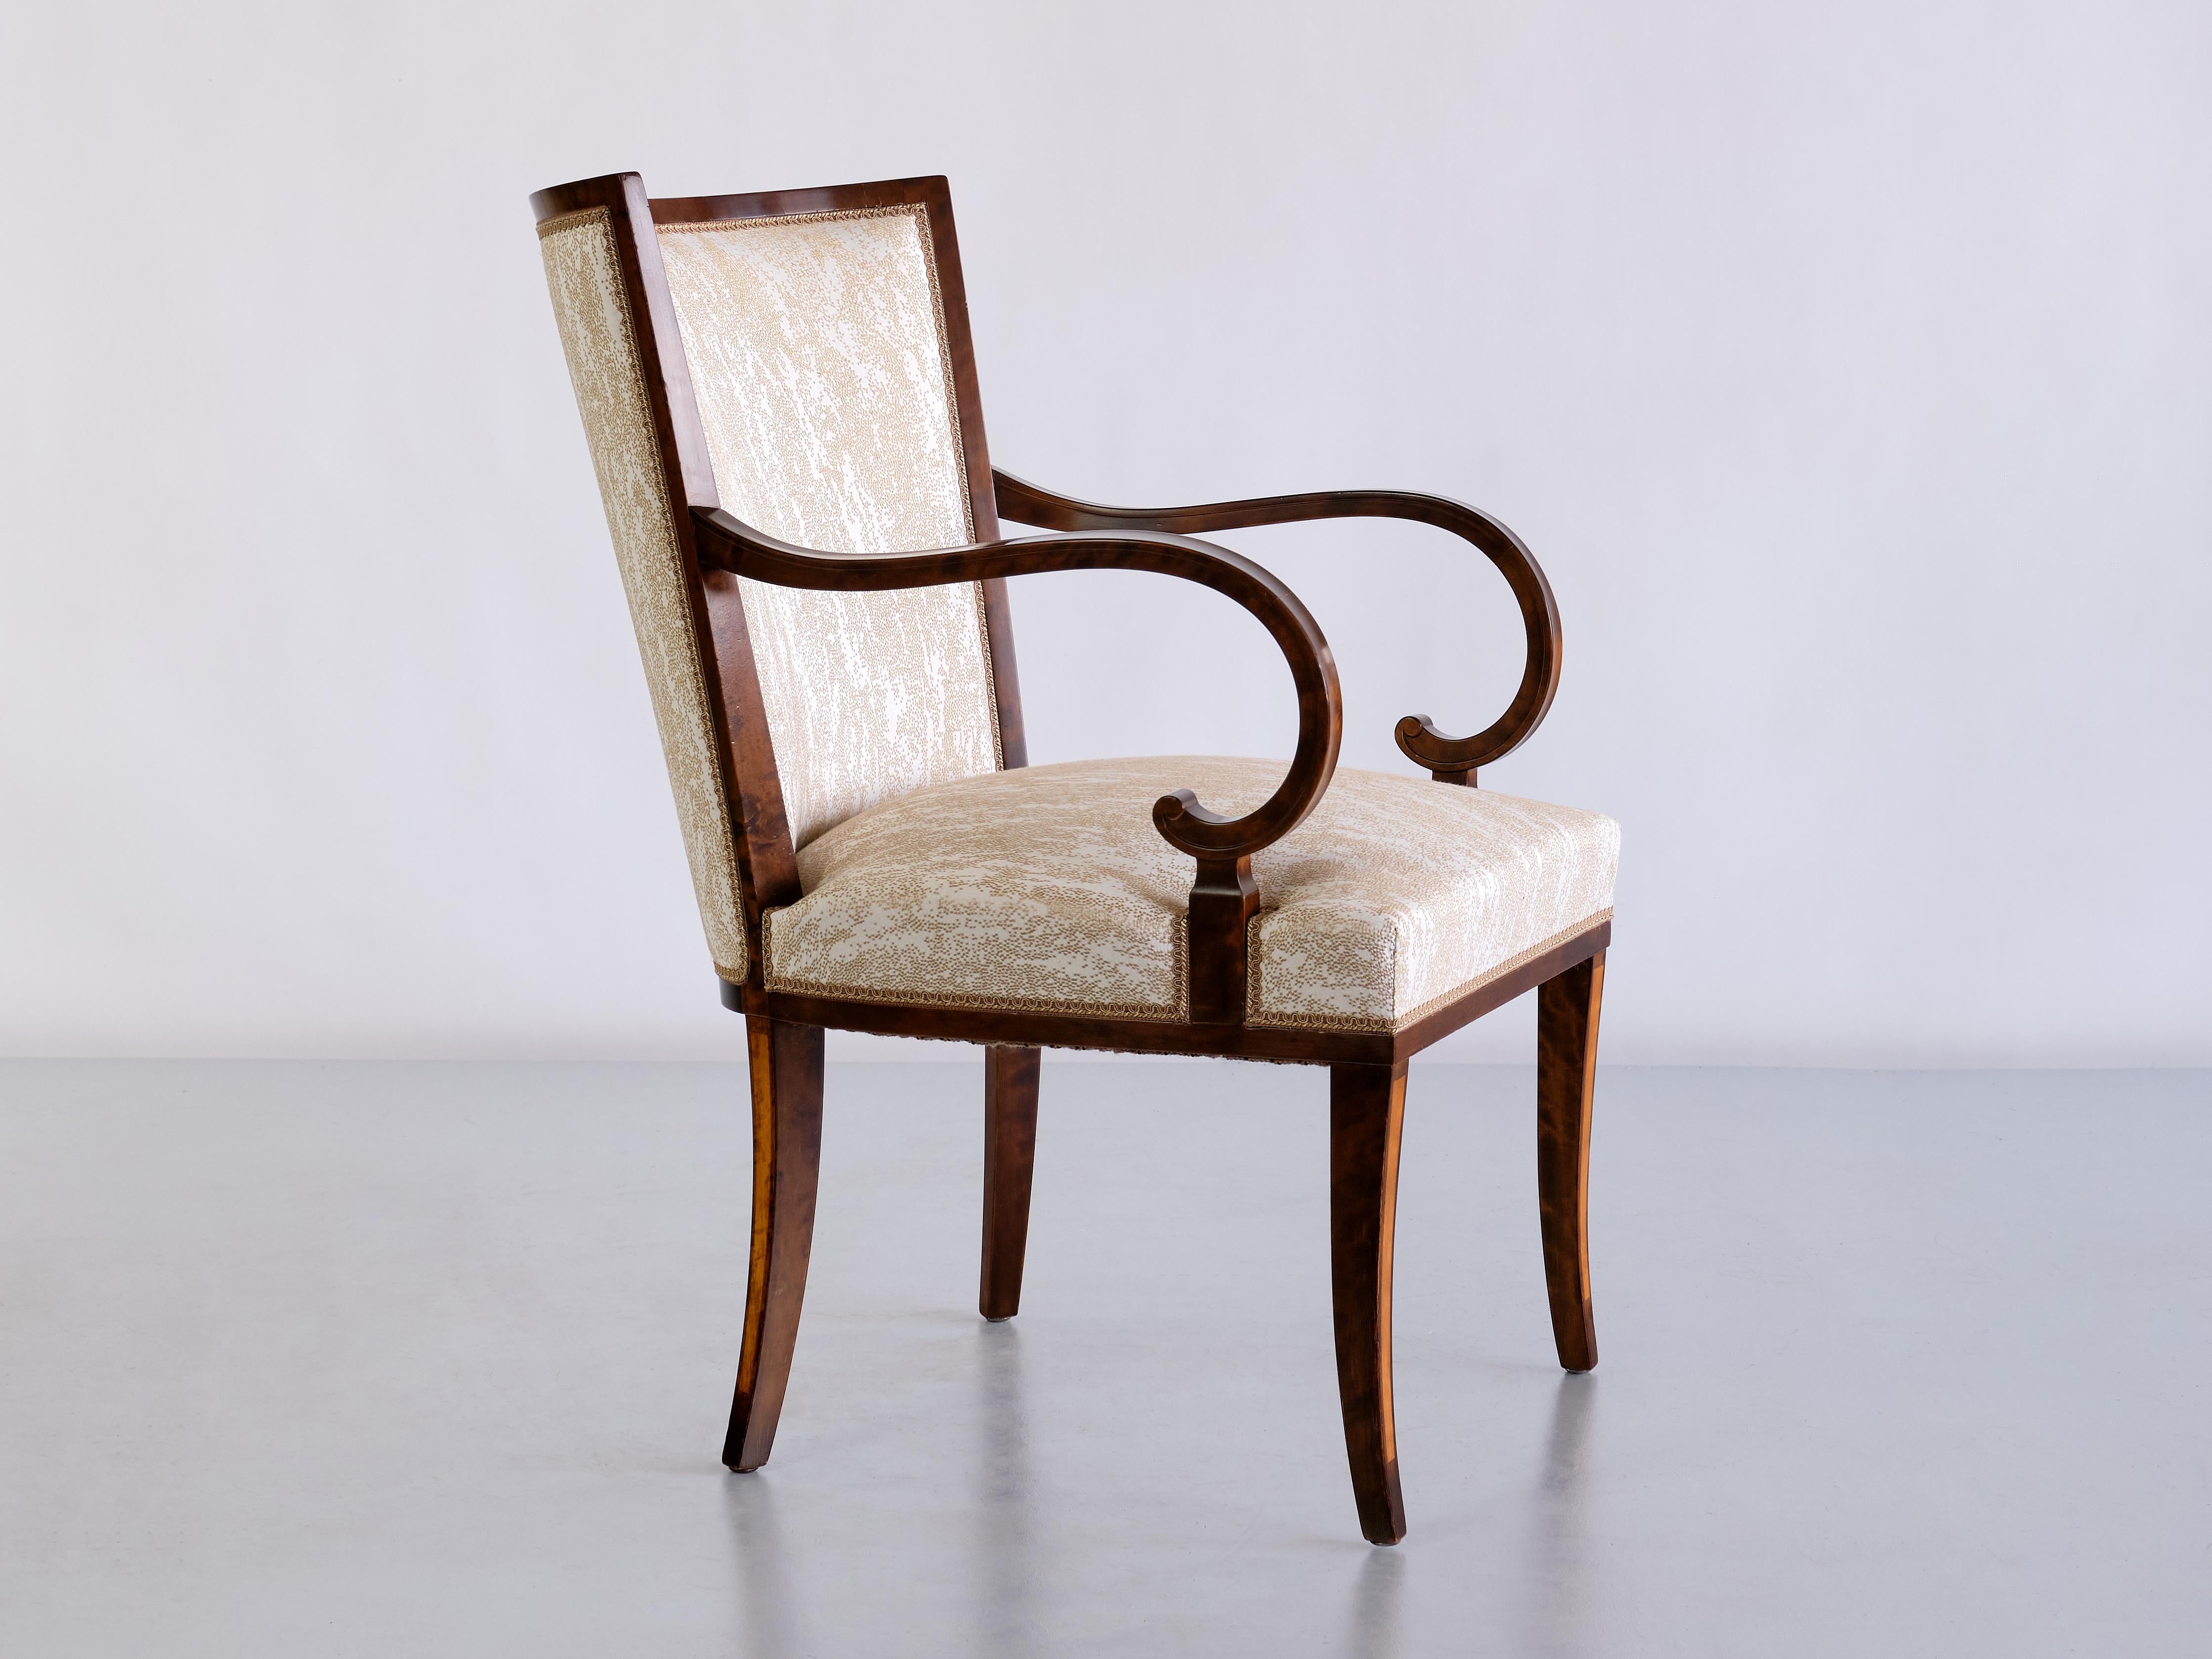 Pair of Carl Malmsten Armchairs in Birch and Satinwood, Bodafors, Sweden, 1930s For Sale 2